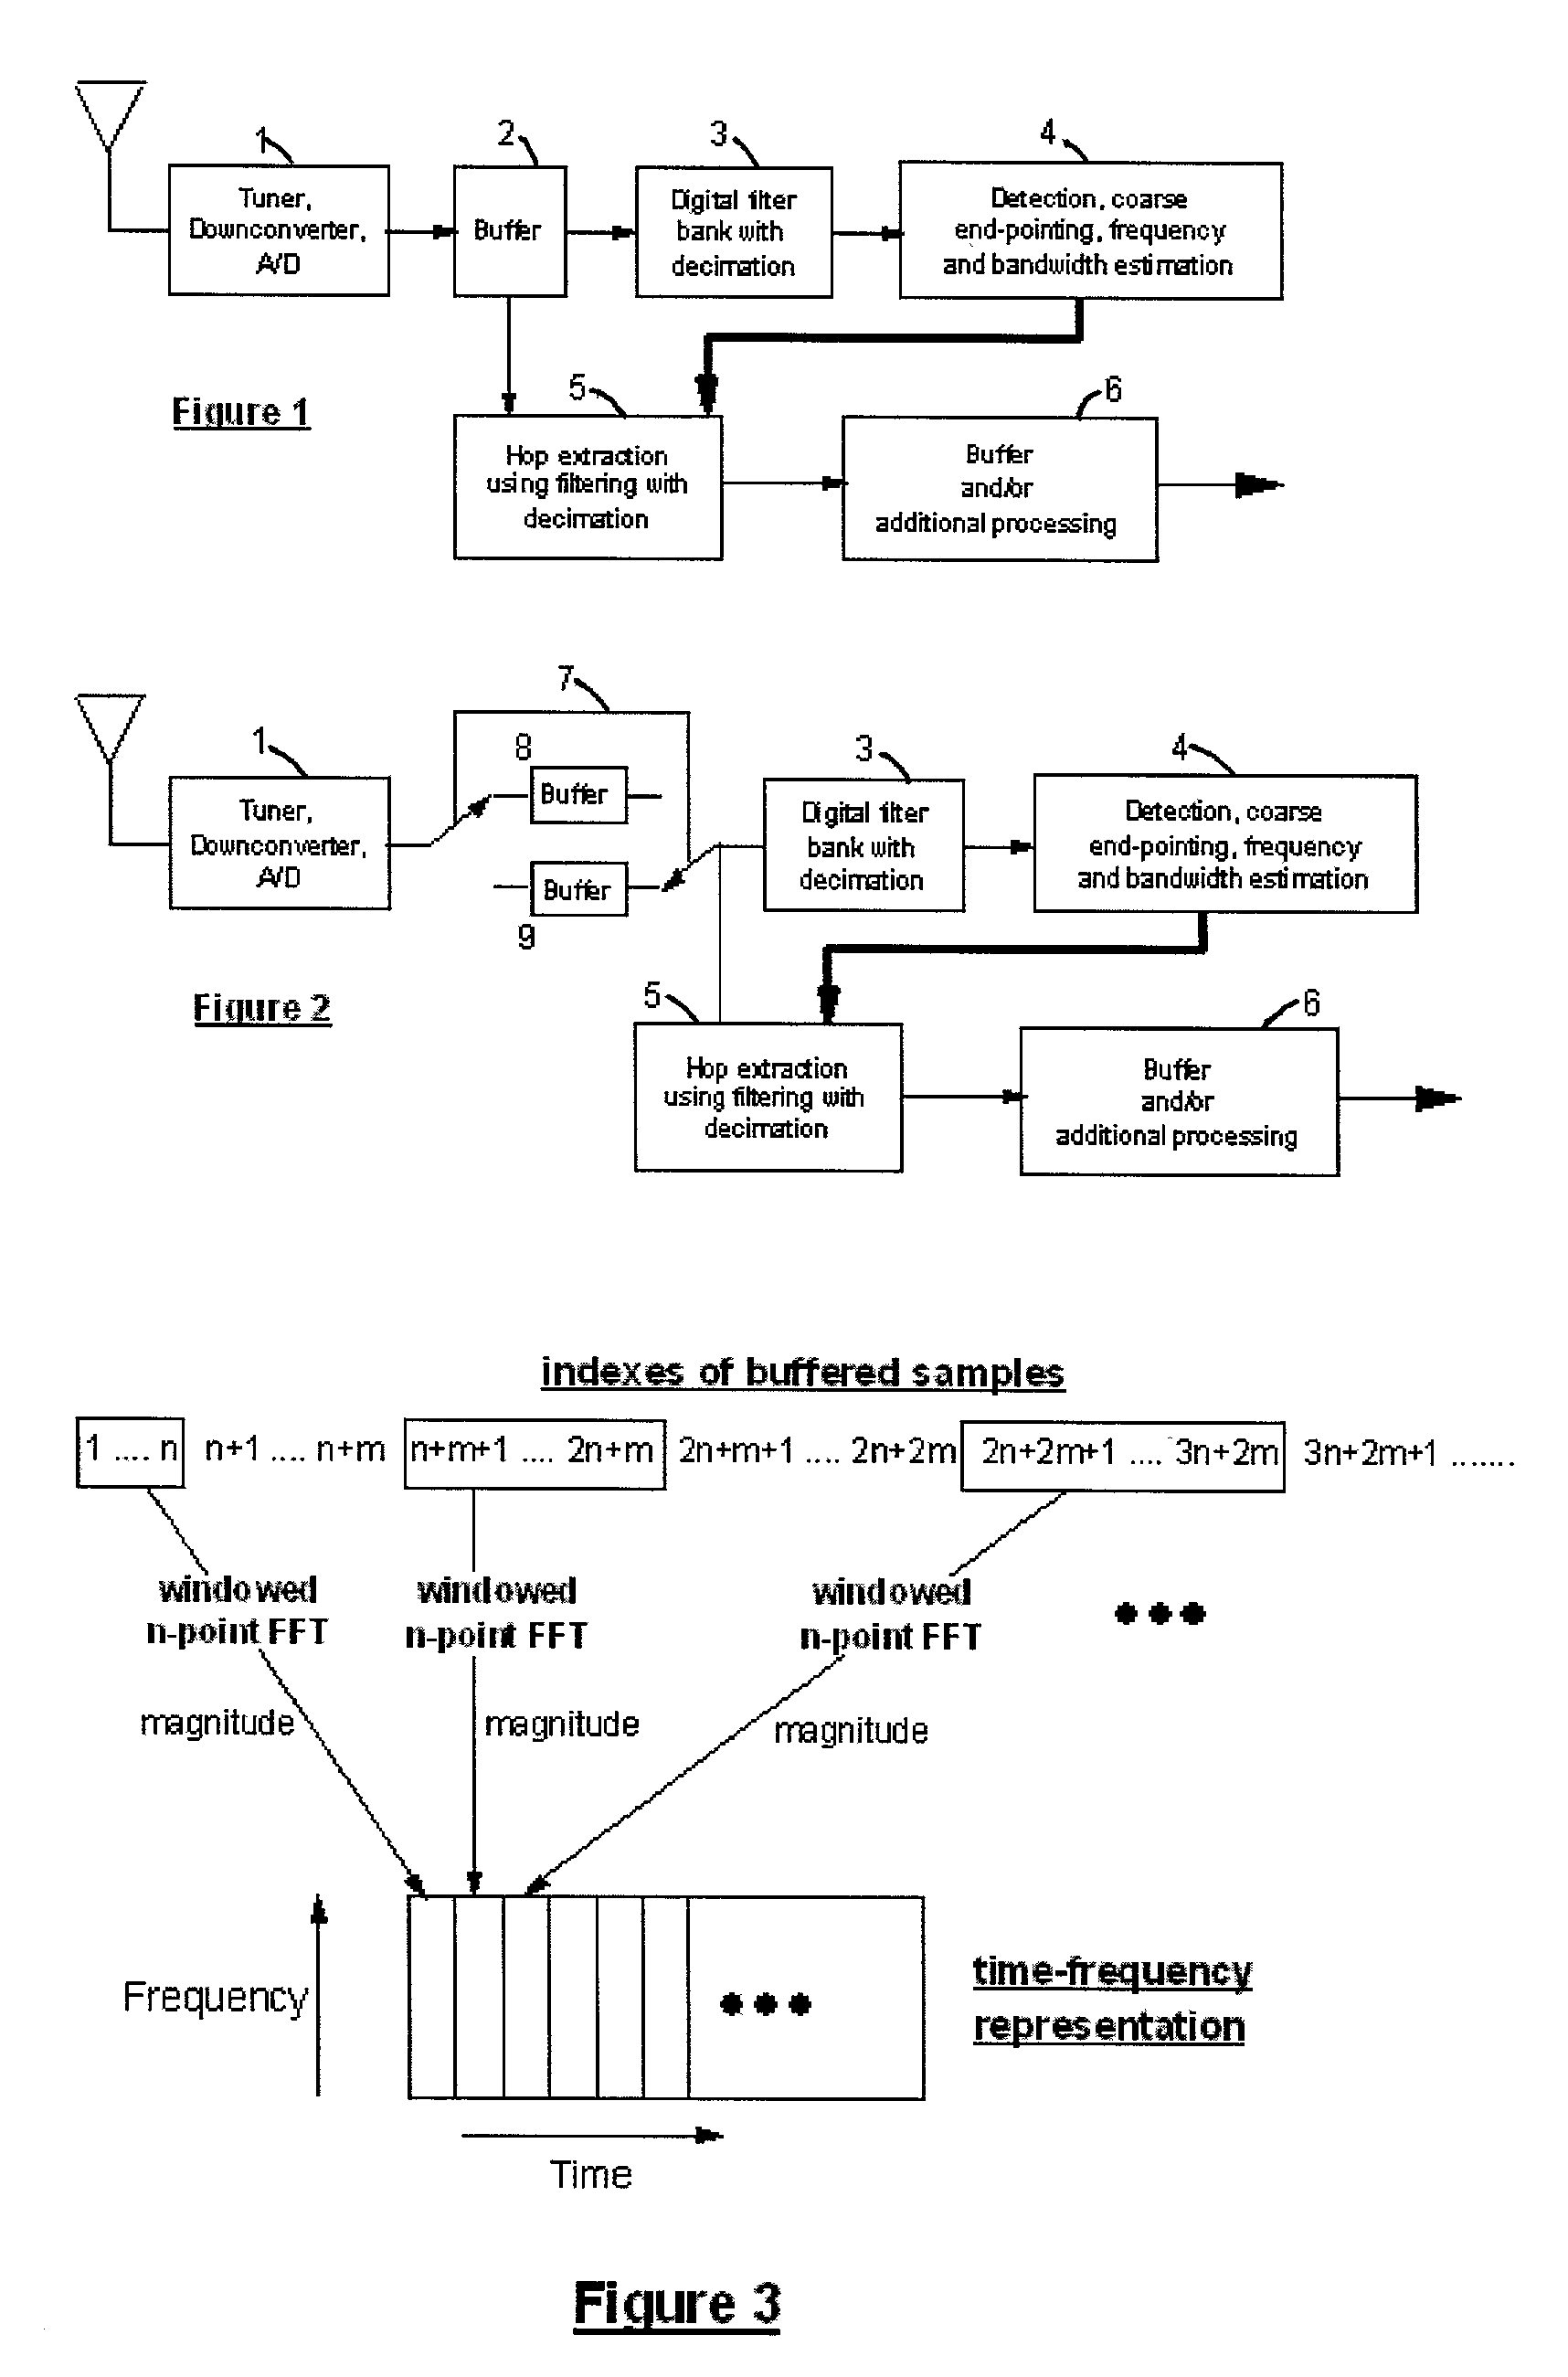 Apparatus and method for a digital, wideband, intercept and analysis processor for frequency hopping signals